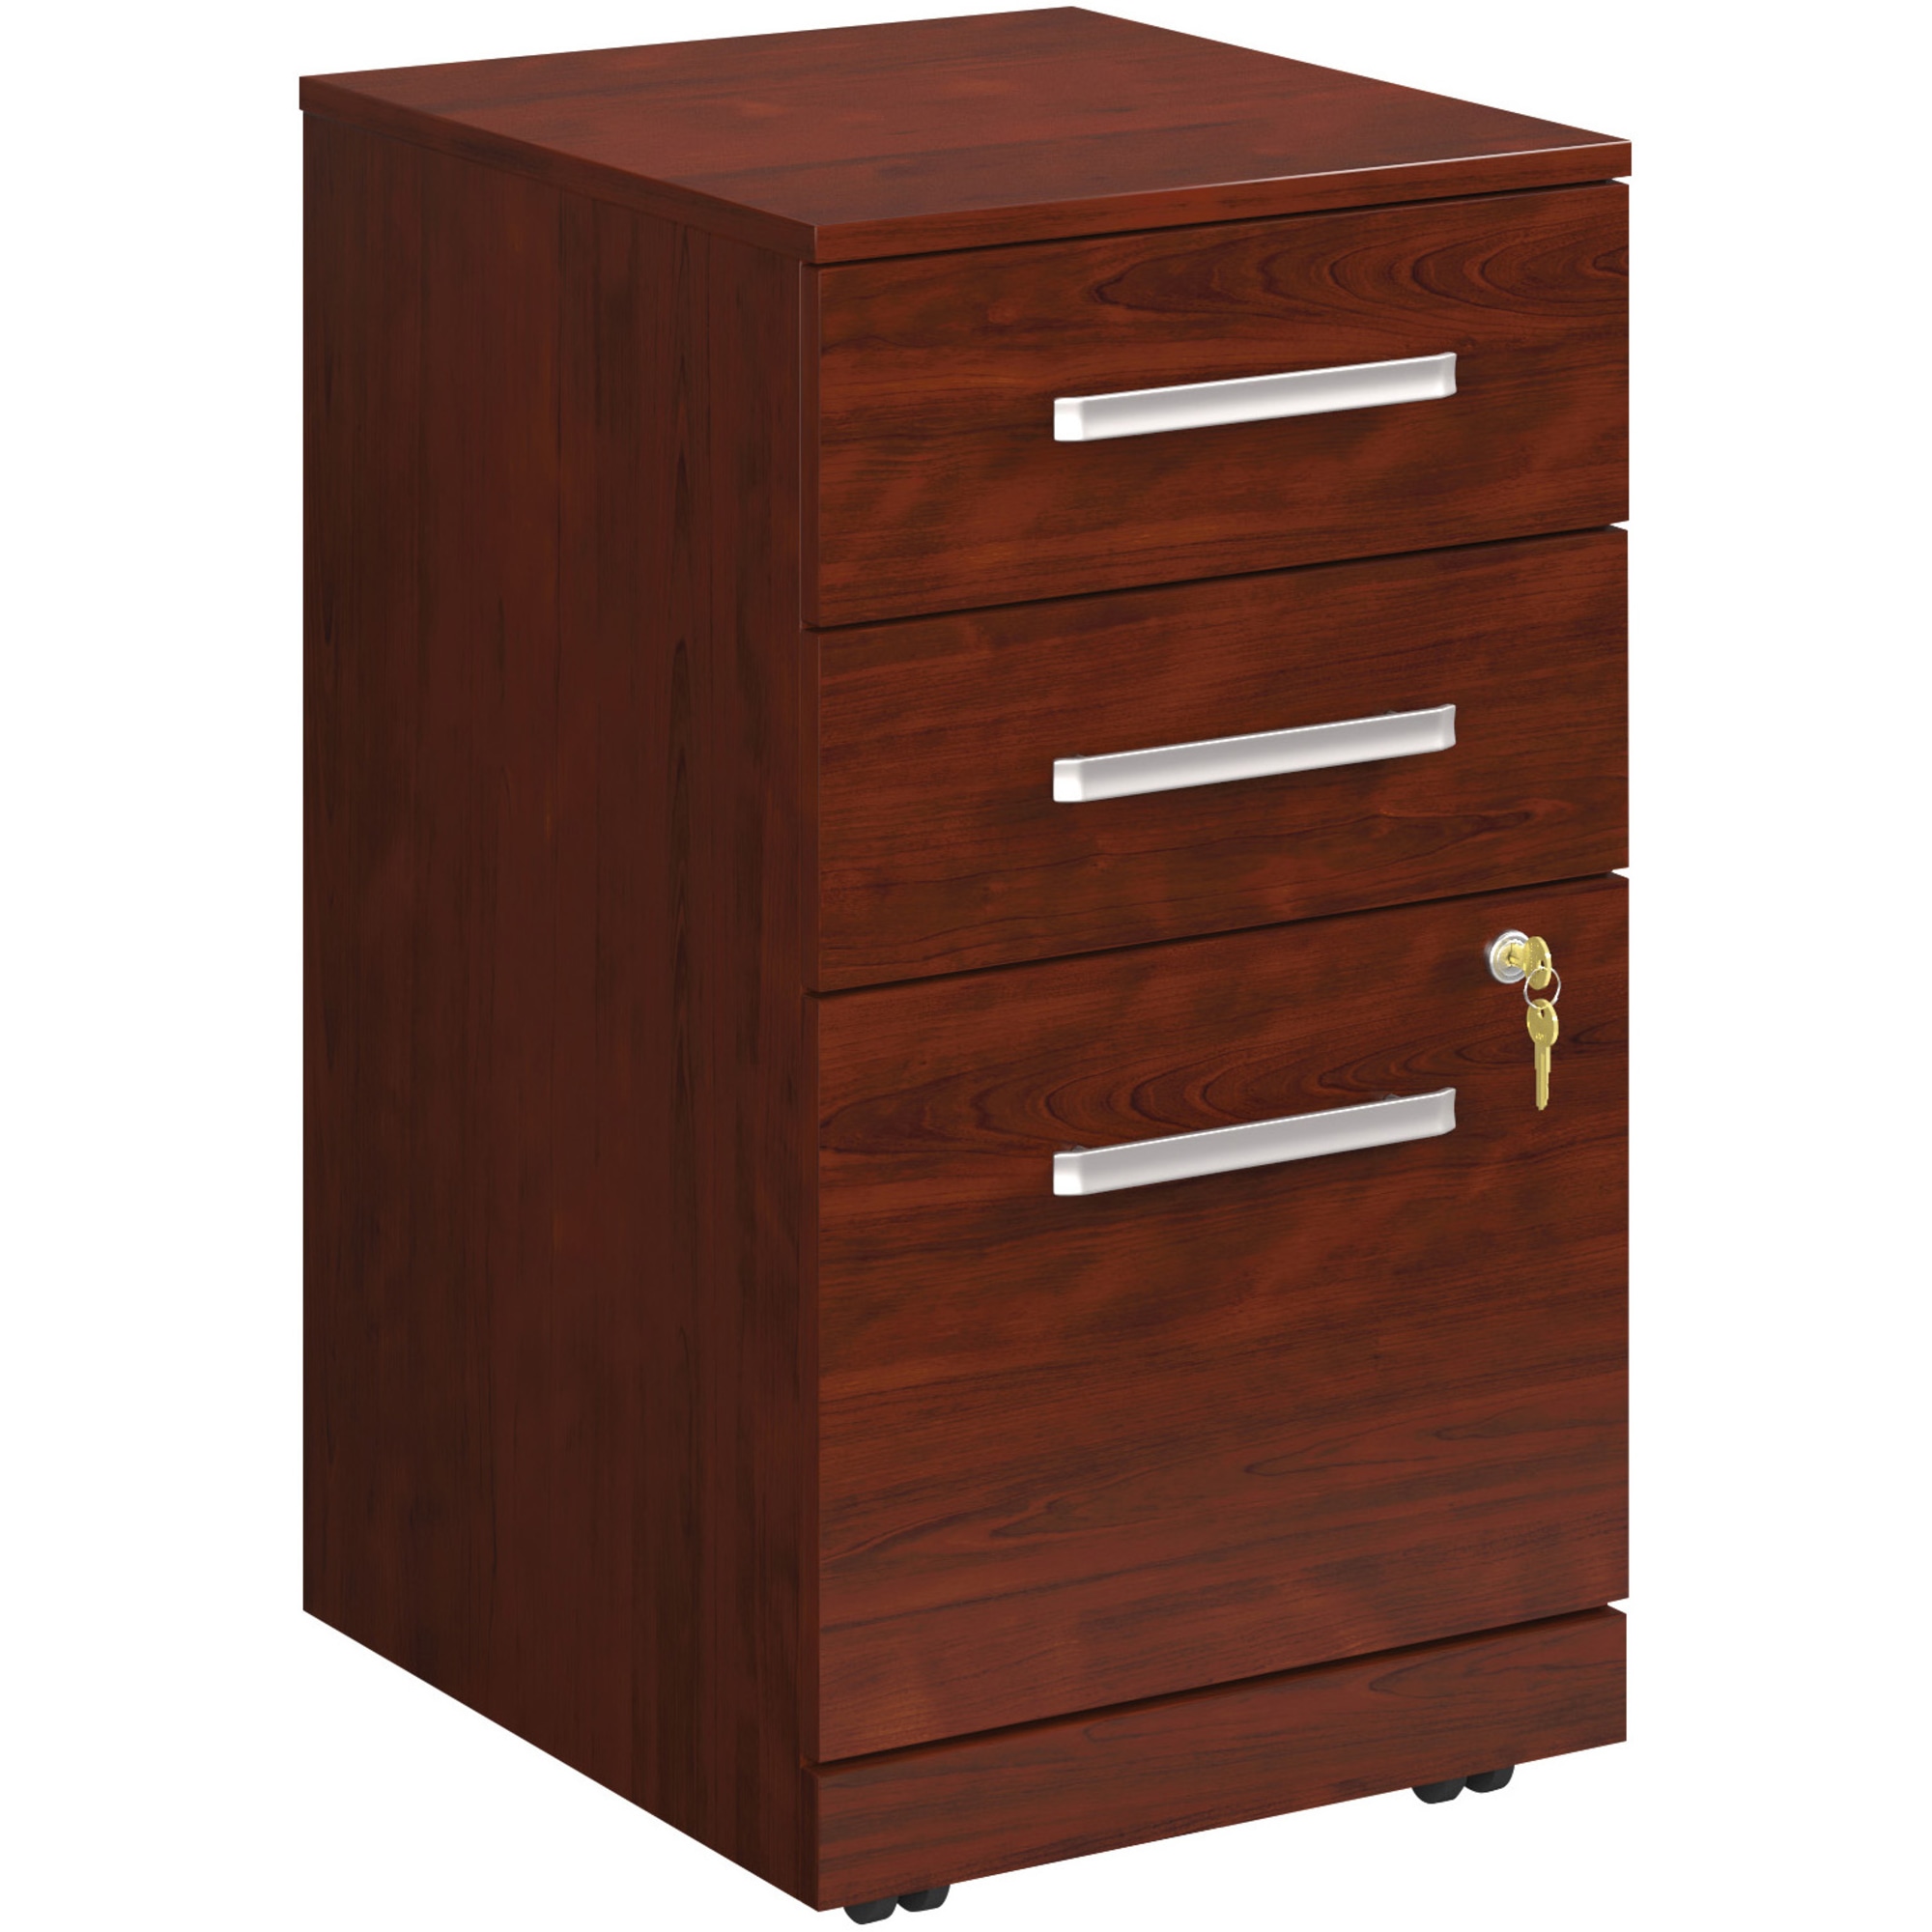 Sauder Affirm 72" x 24" Desk Shell/Lateral File/Two 3-Drawer Mobile Files Cherry - image 5 of 8